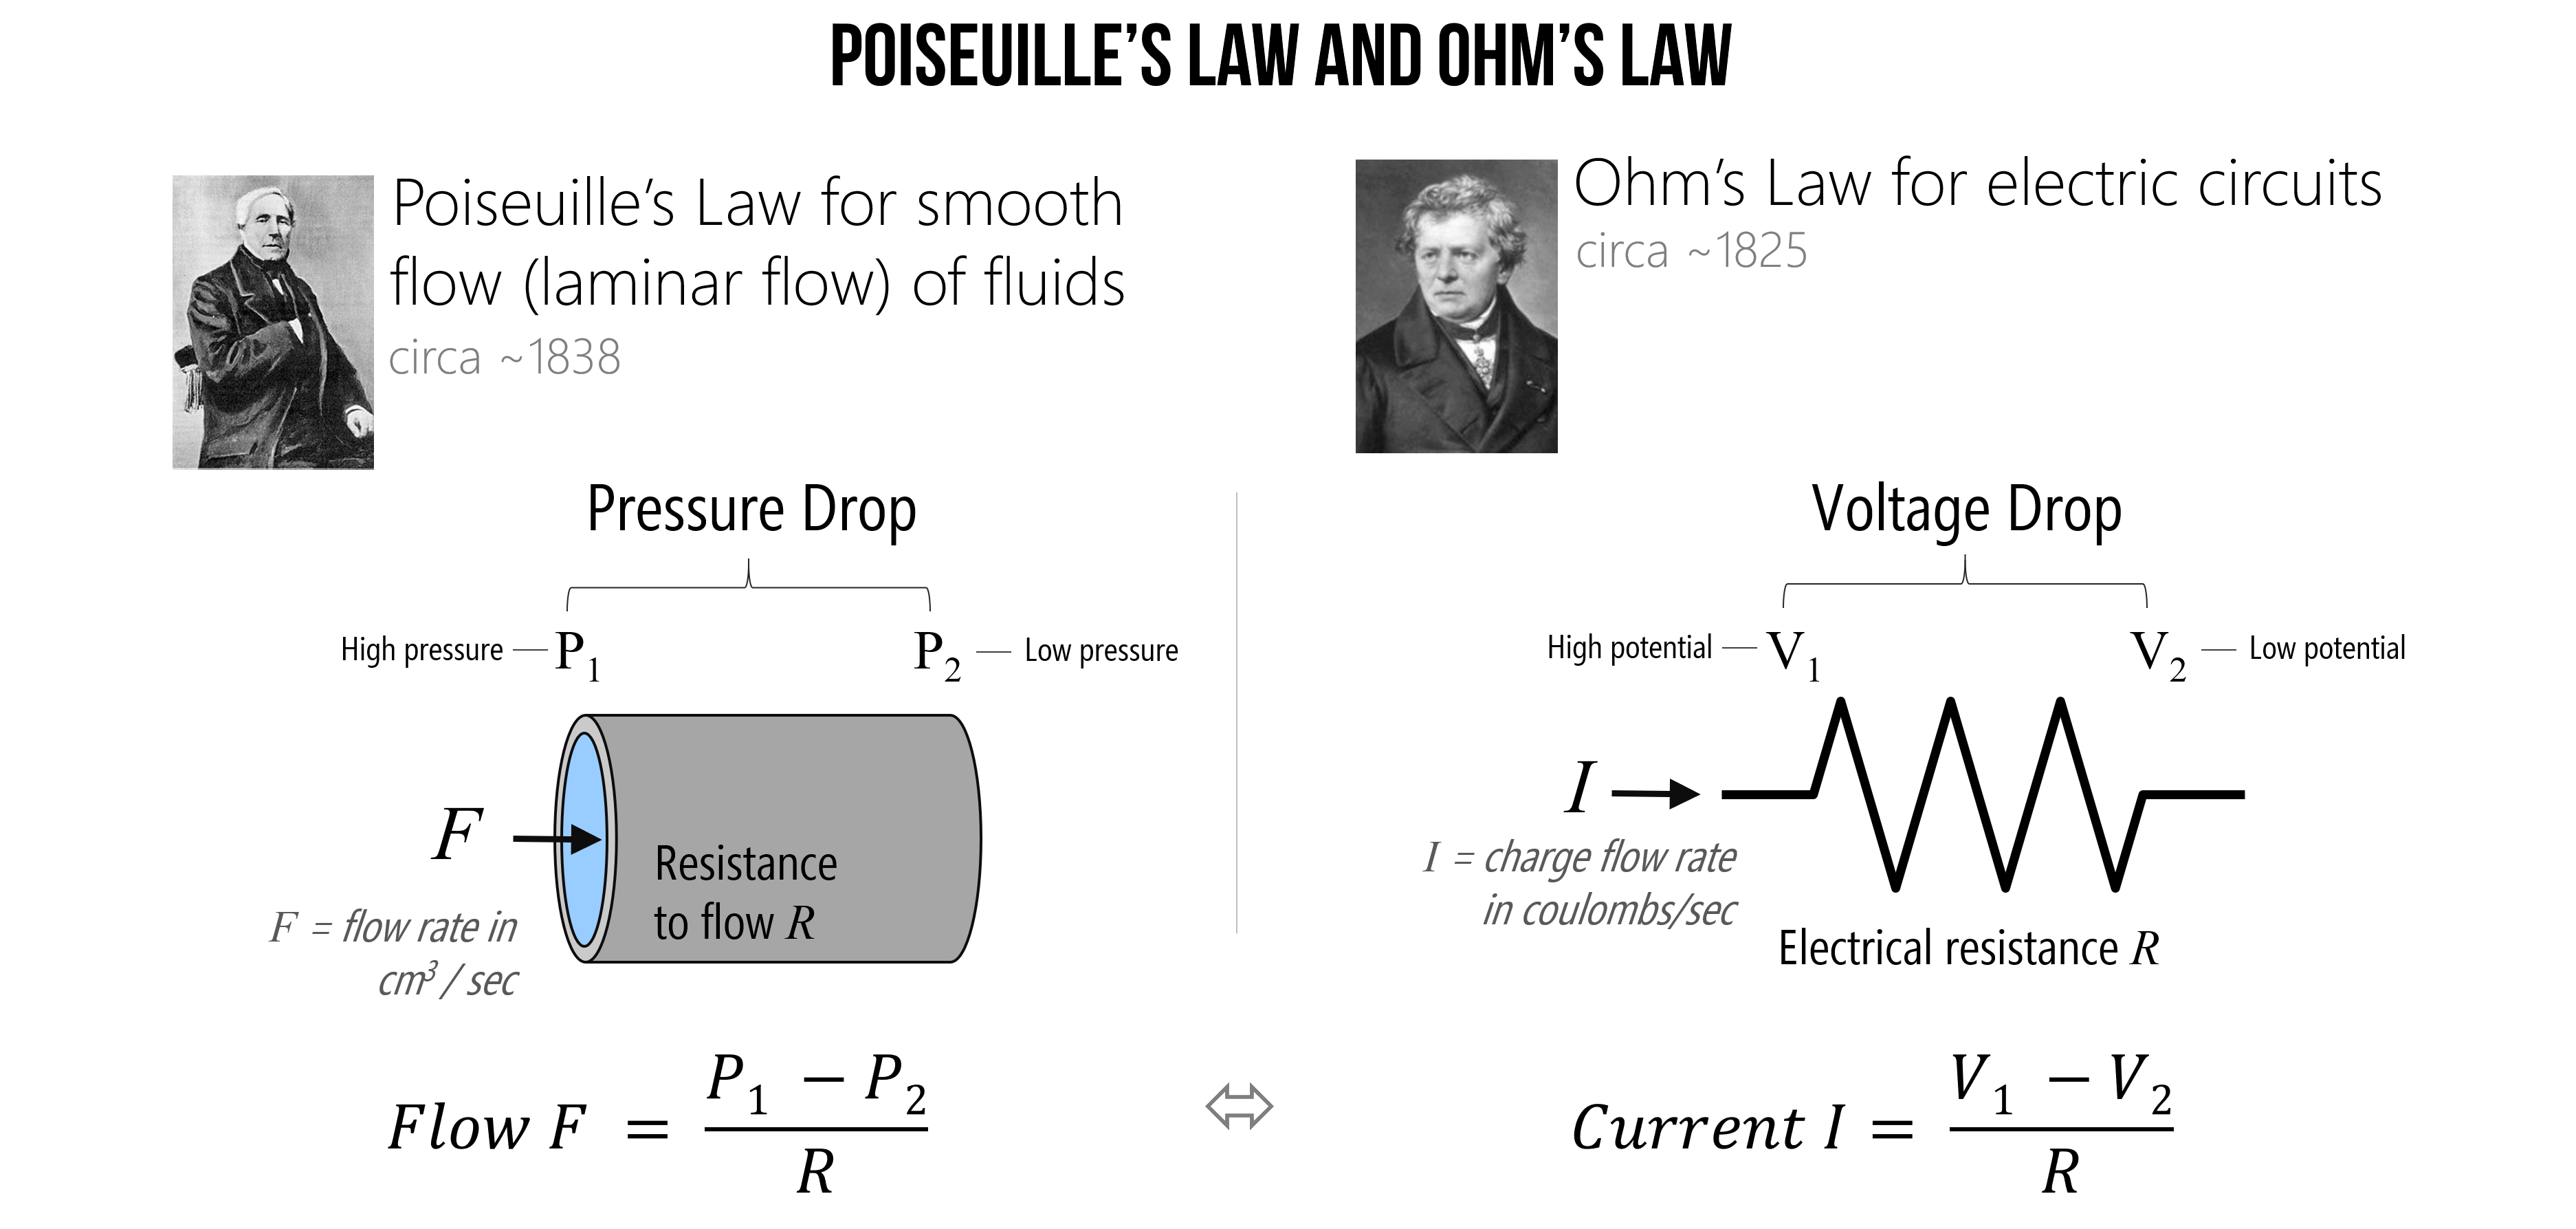 An image showing that for laminar (smooth) flow of water in pipes, the equation for determining the water flow rate (called Poiseuille's Law) is an equivalent to determining the current flow in a circuit using Ohm's Law.